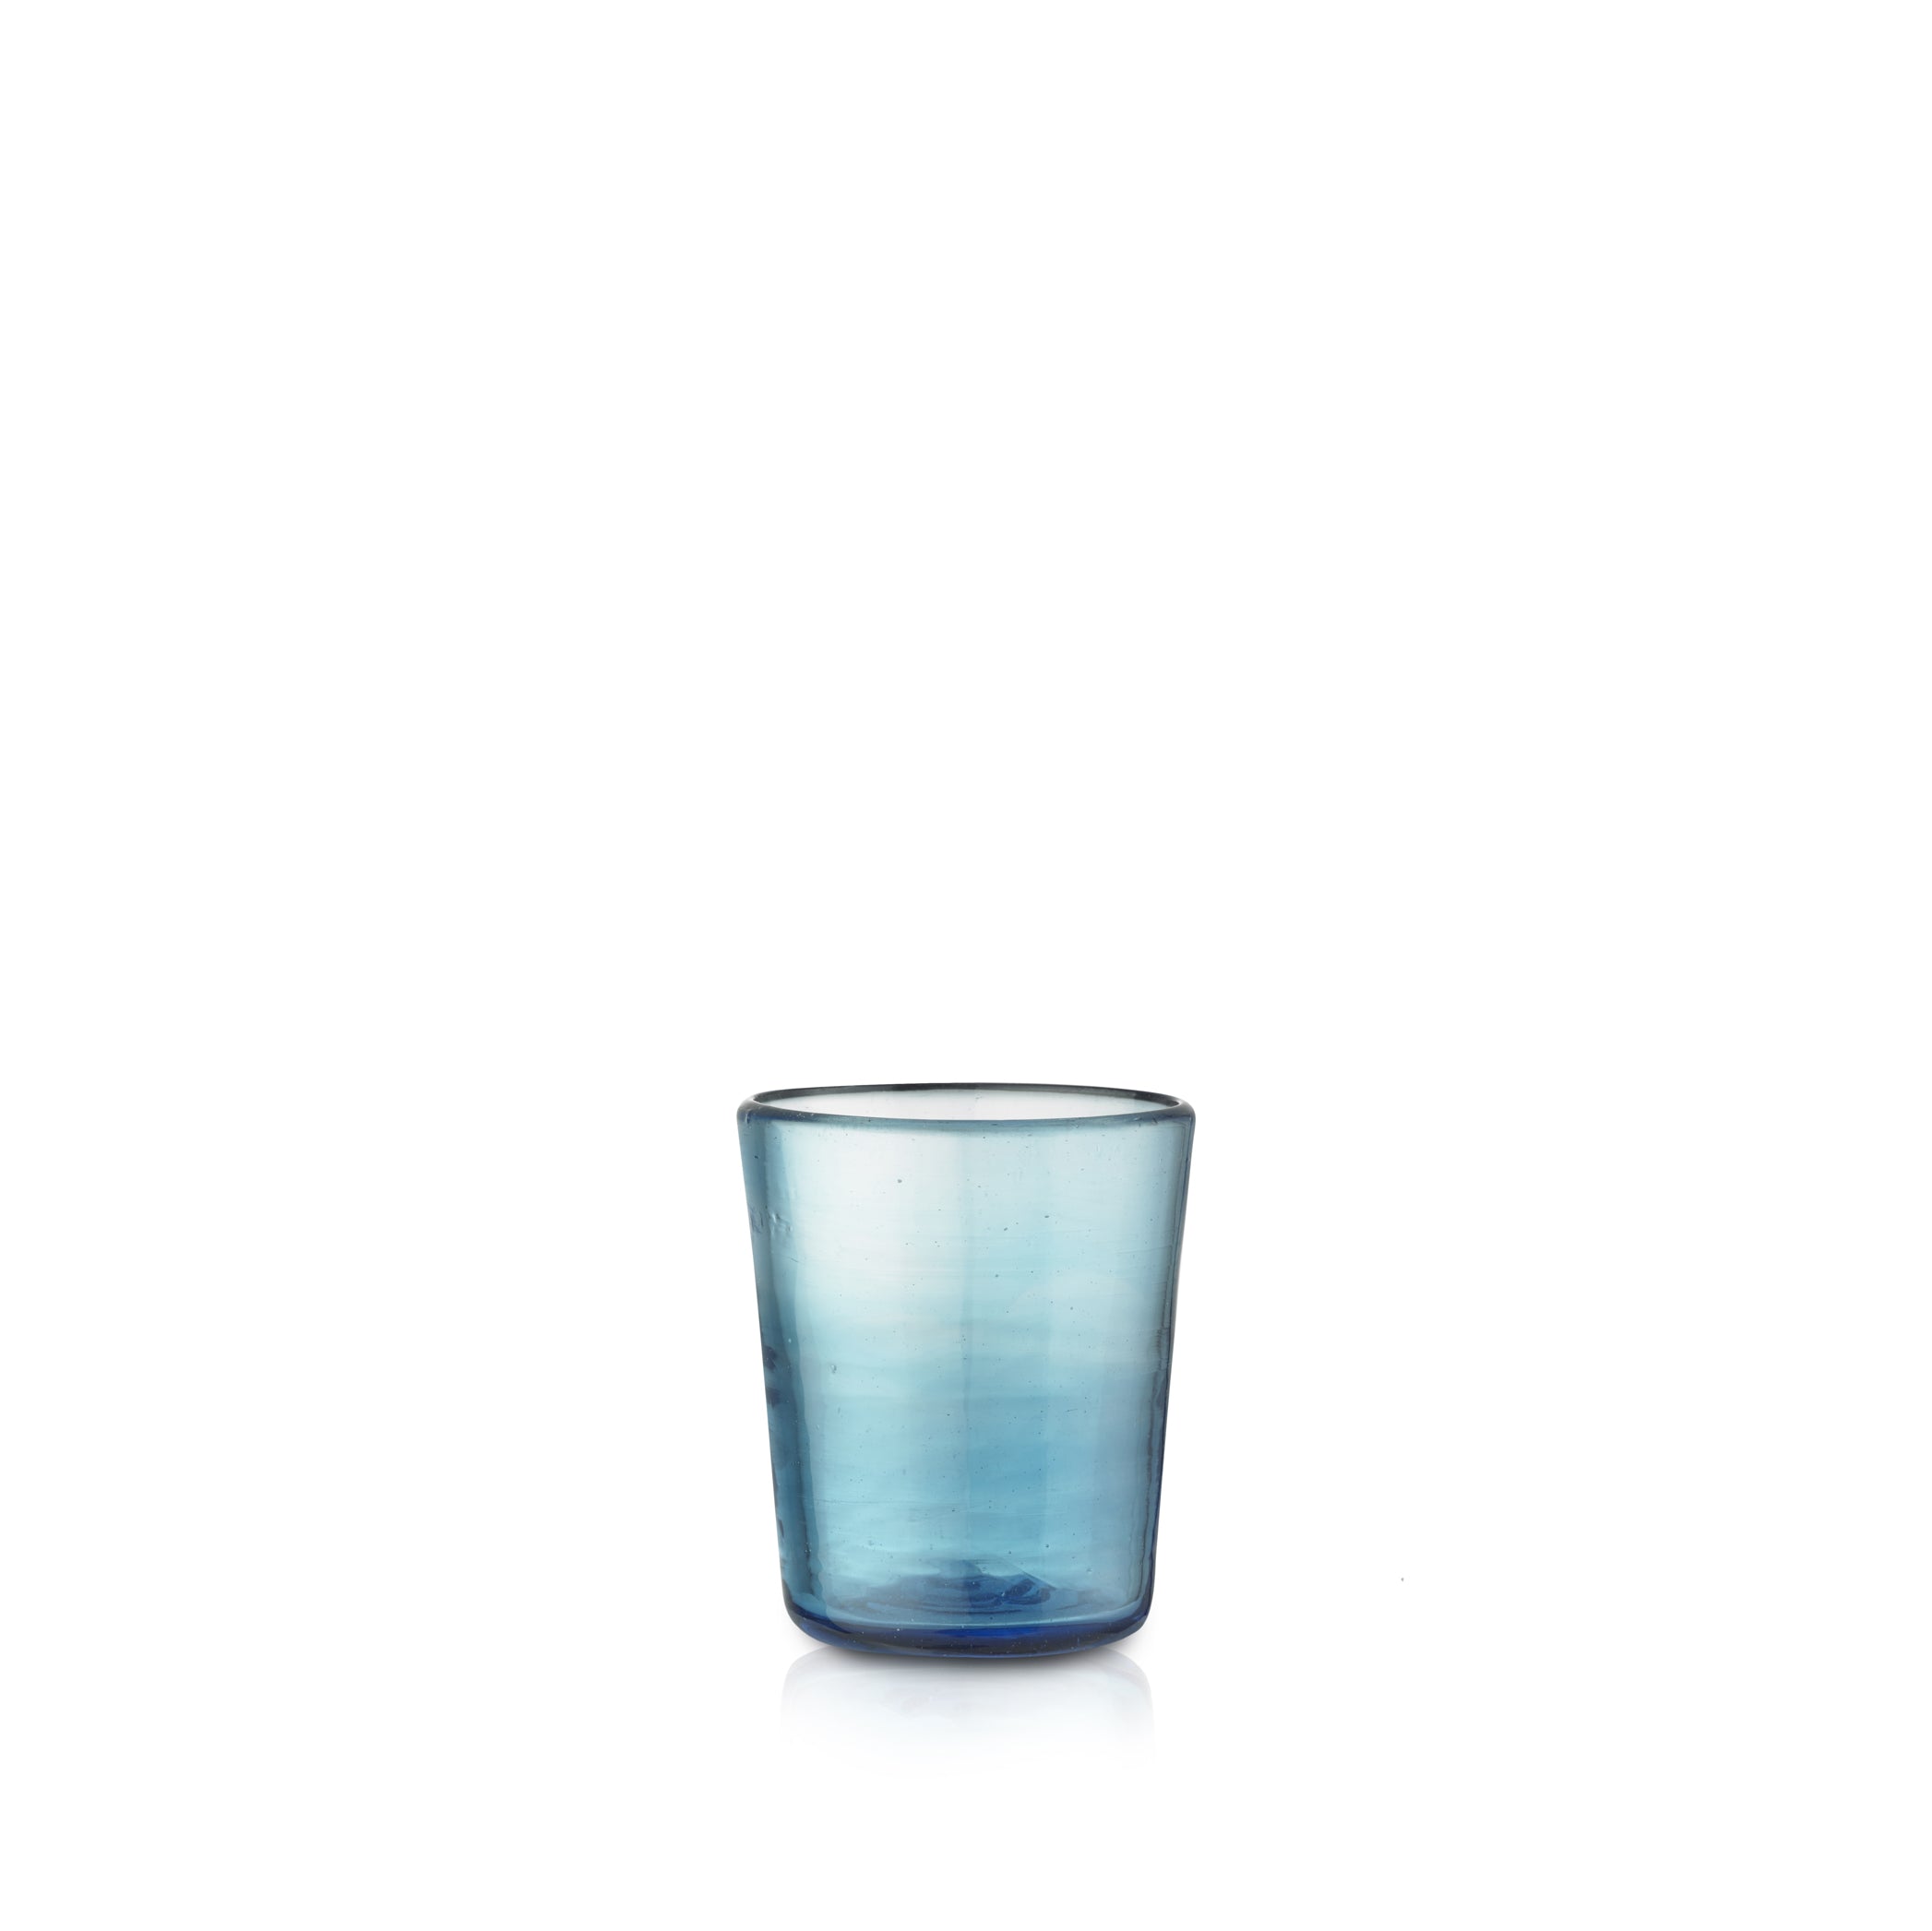 Handblown Small Water Tumbler in Turquoise Blue, 8cm